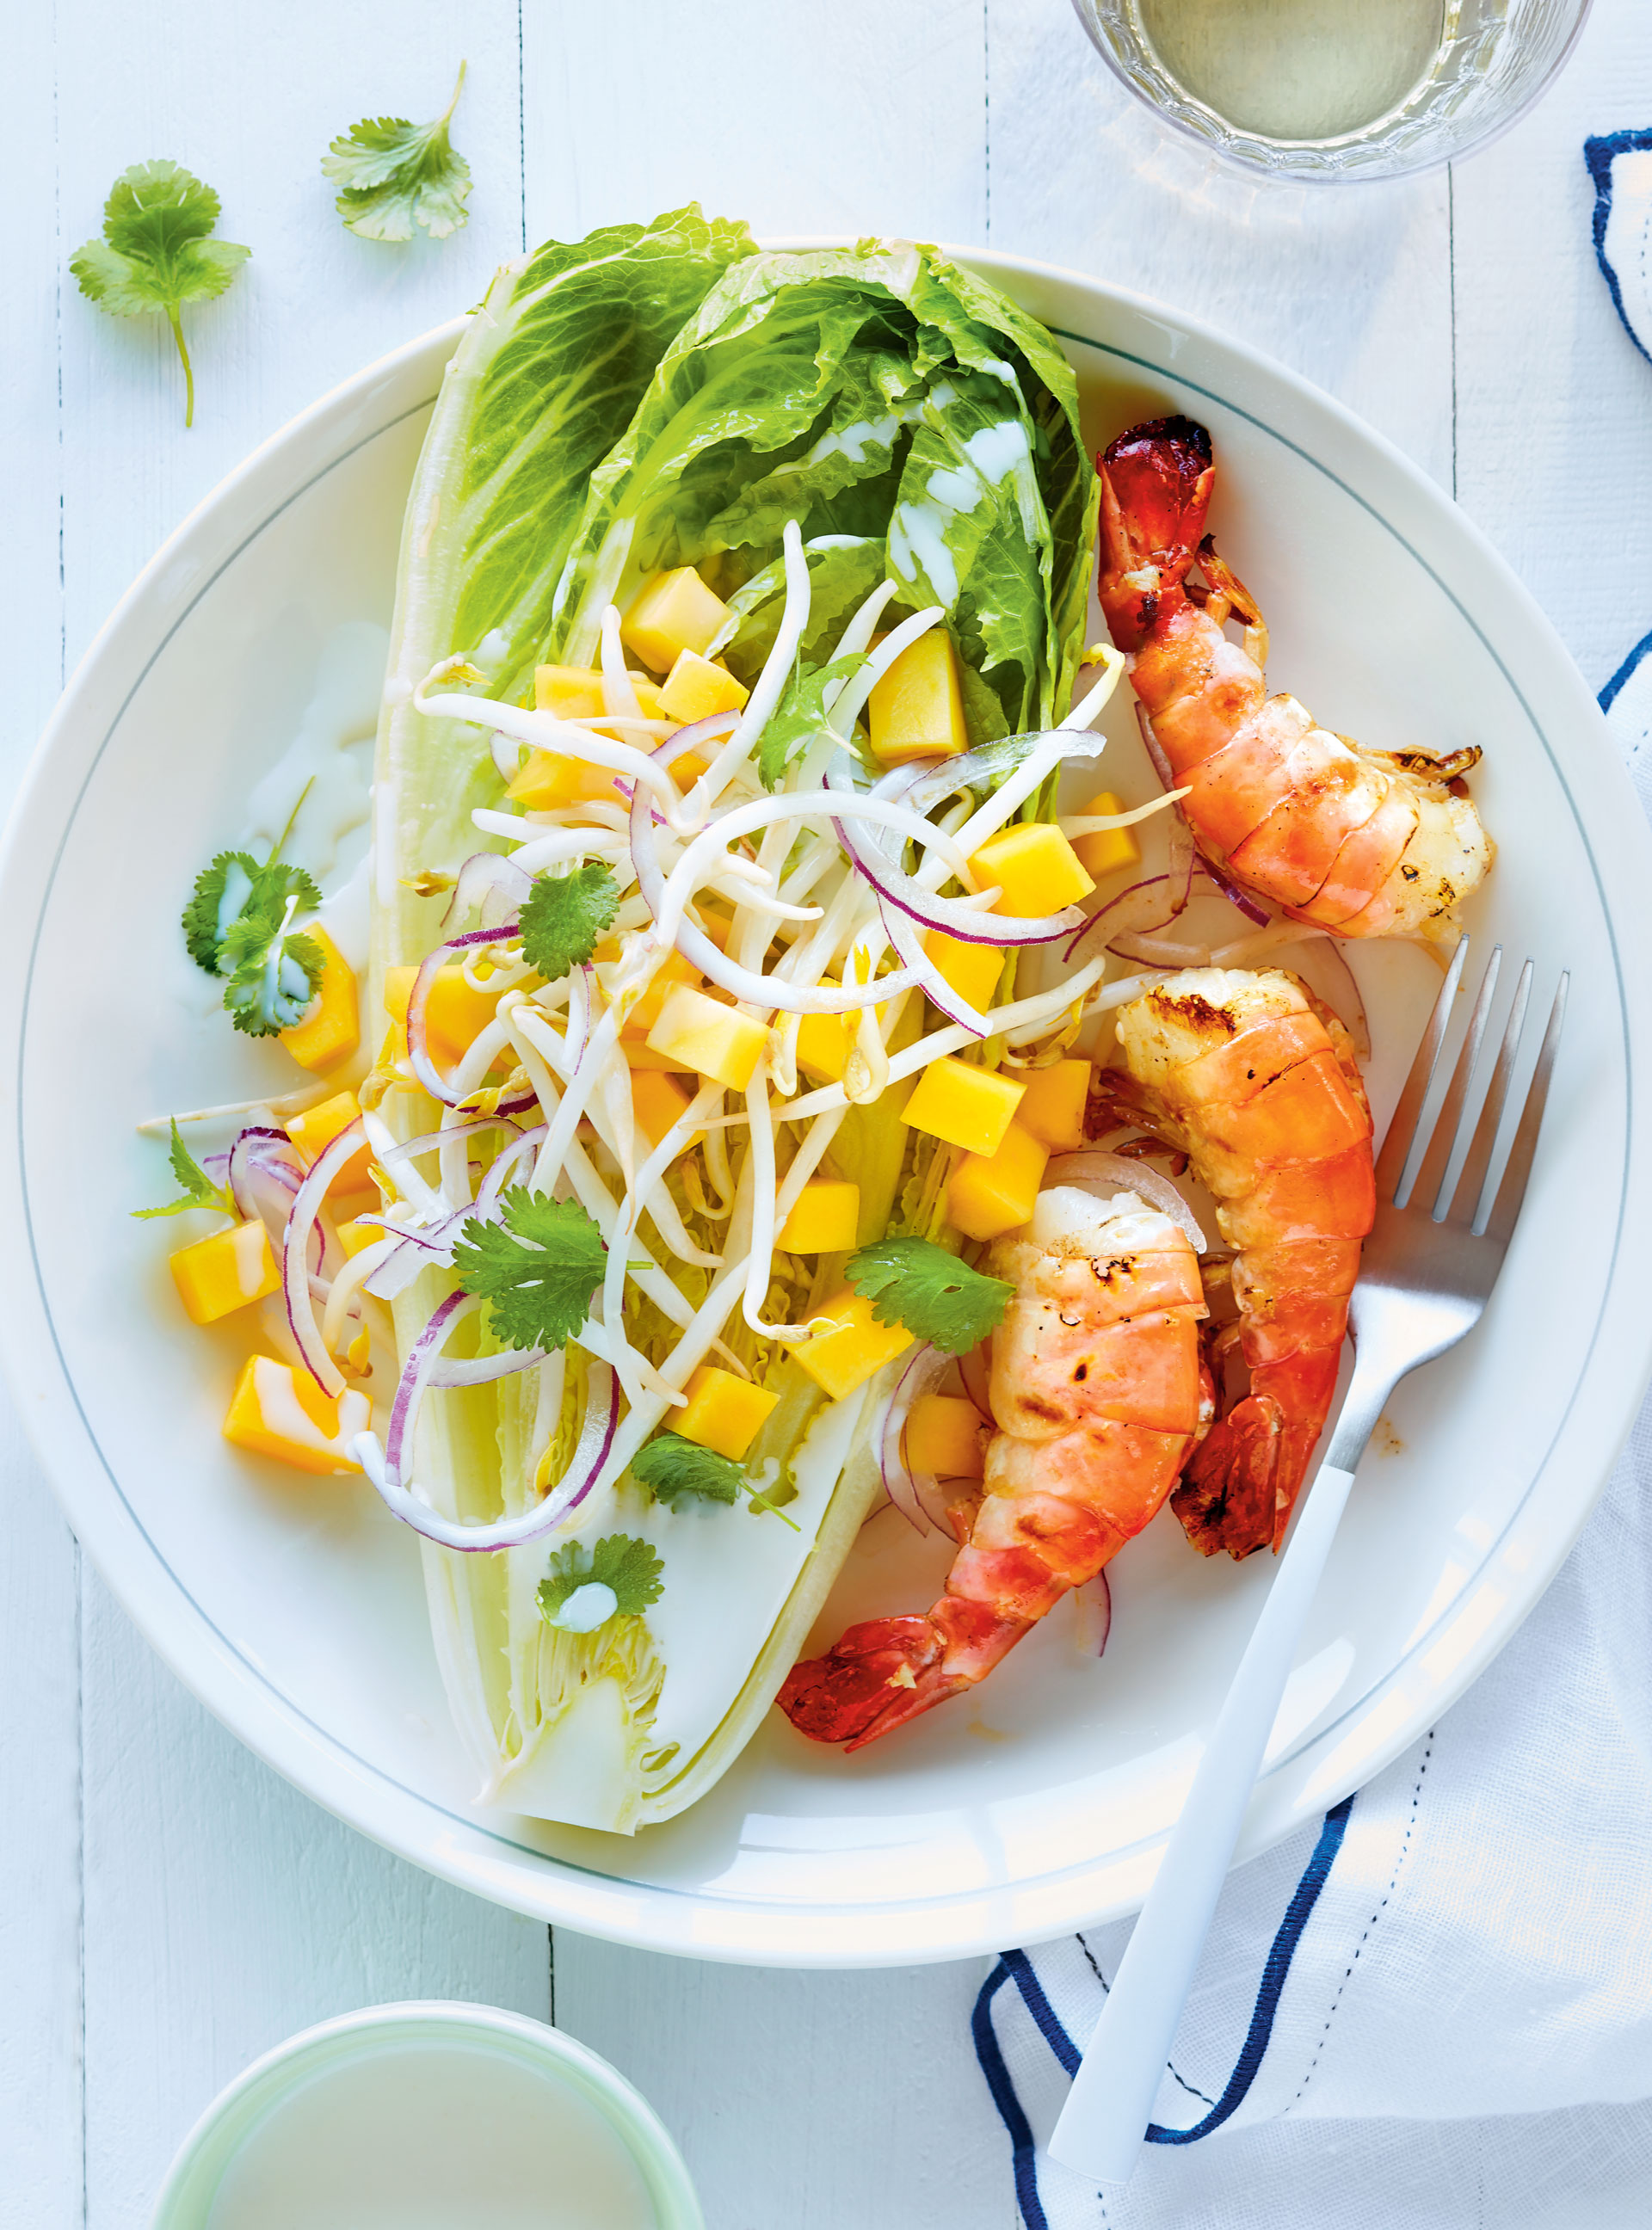 Grilled Shrimp with Romaine Lettuce and Coconut Milk Dressing